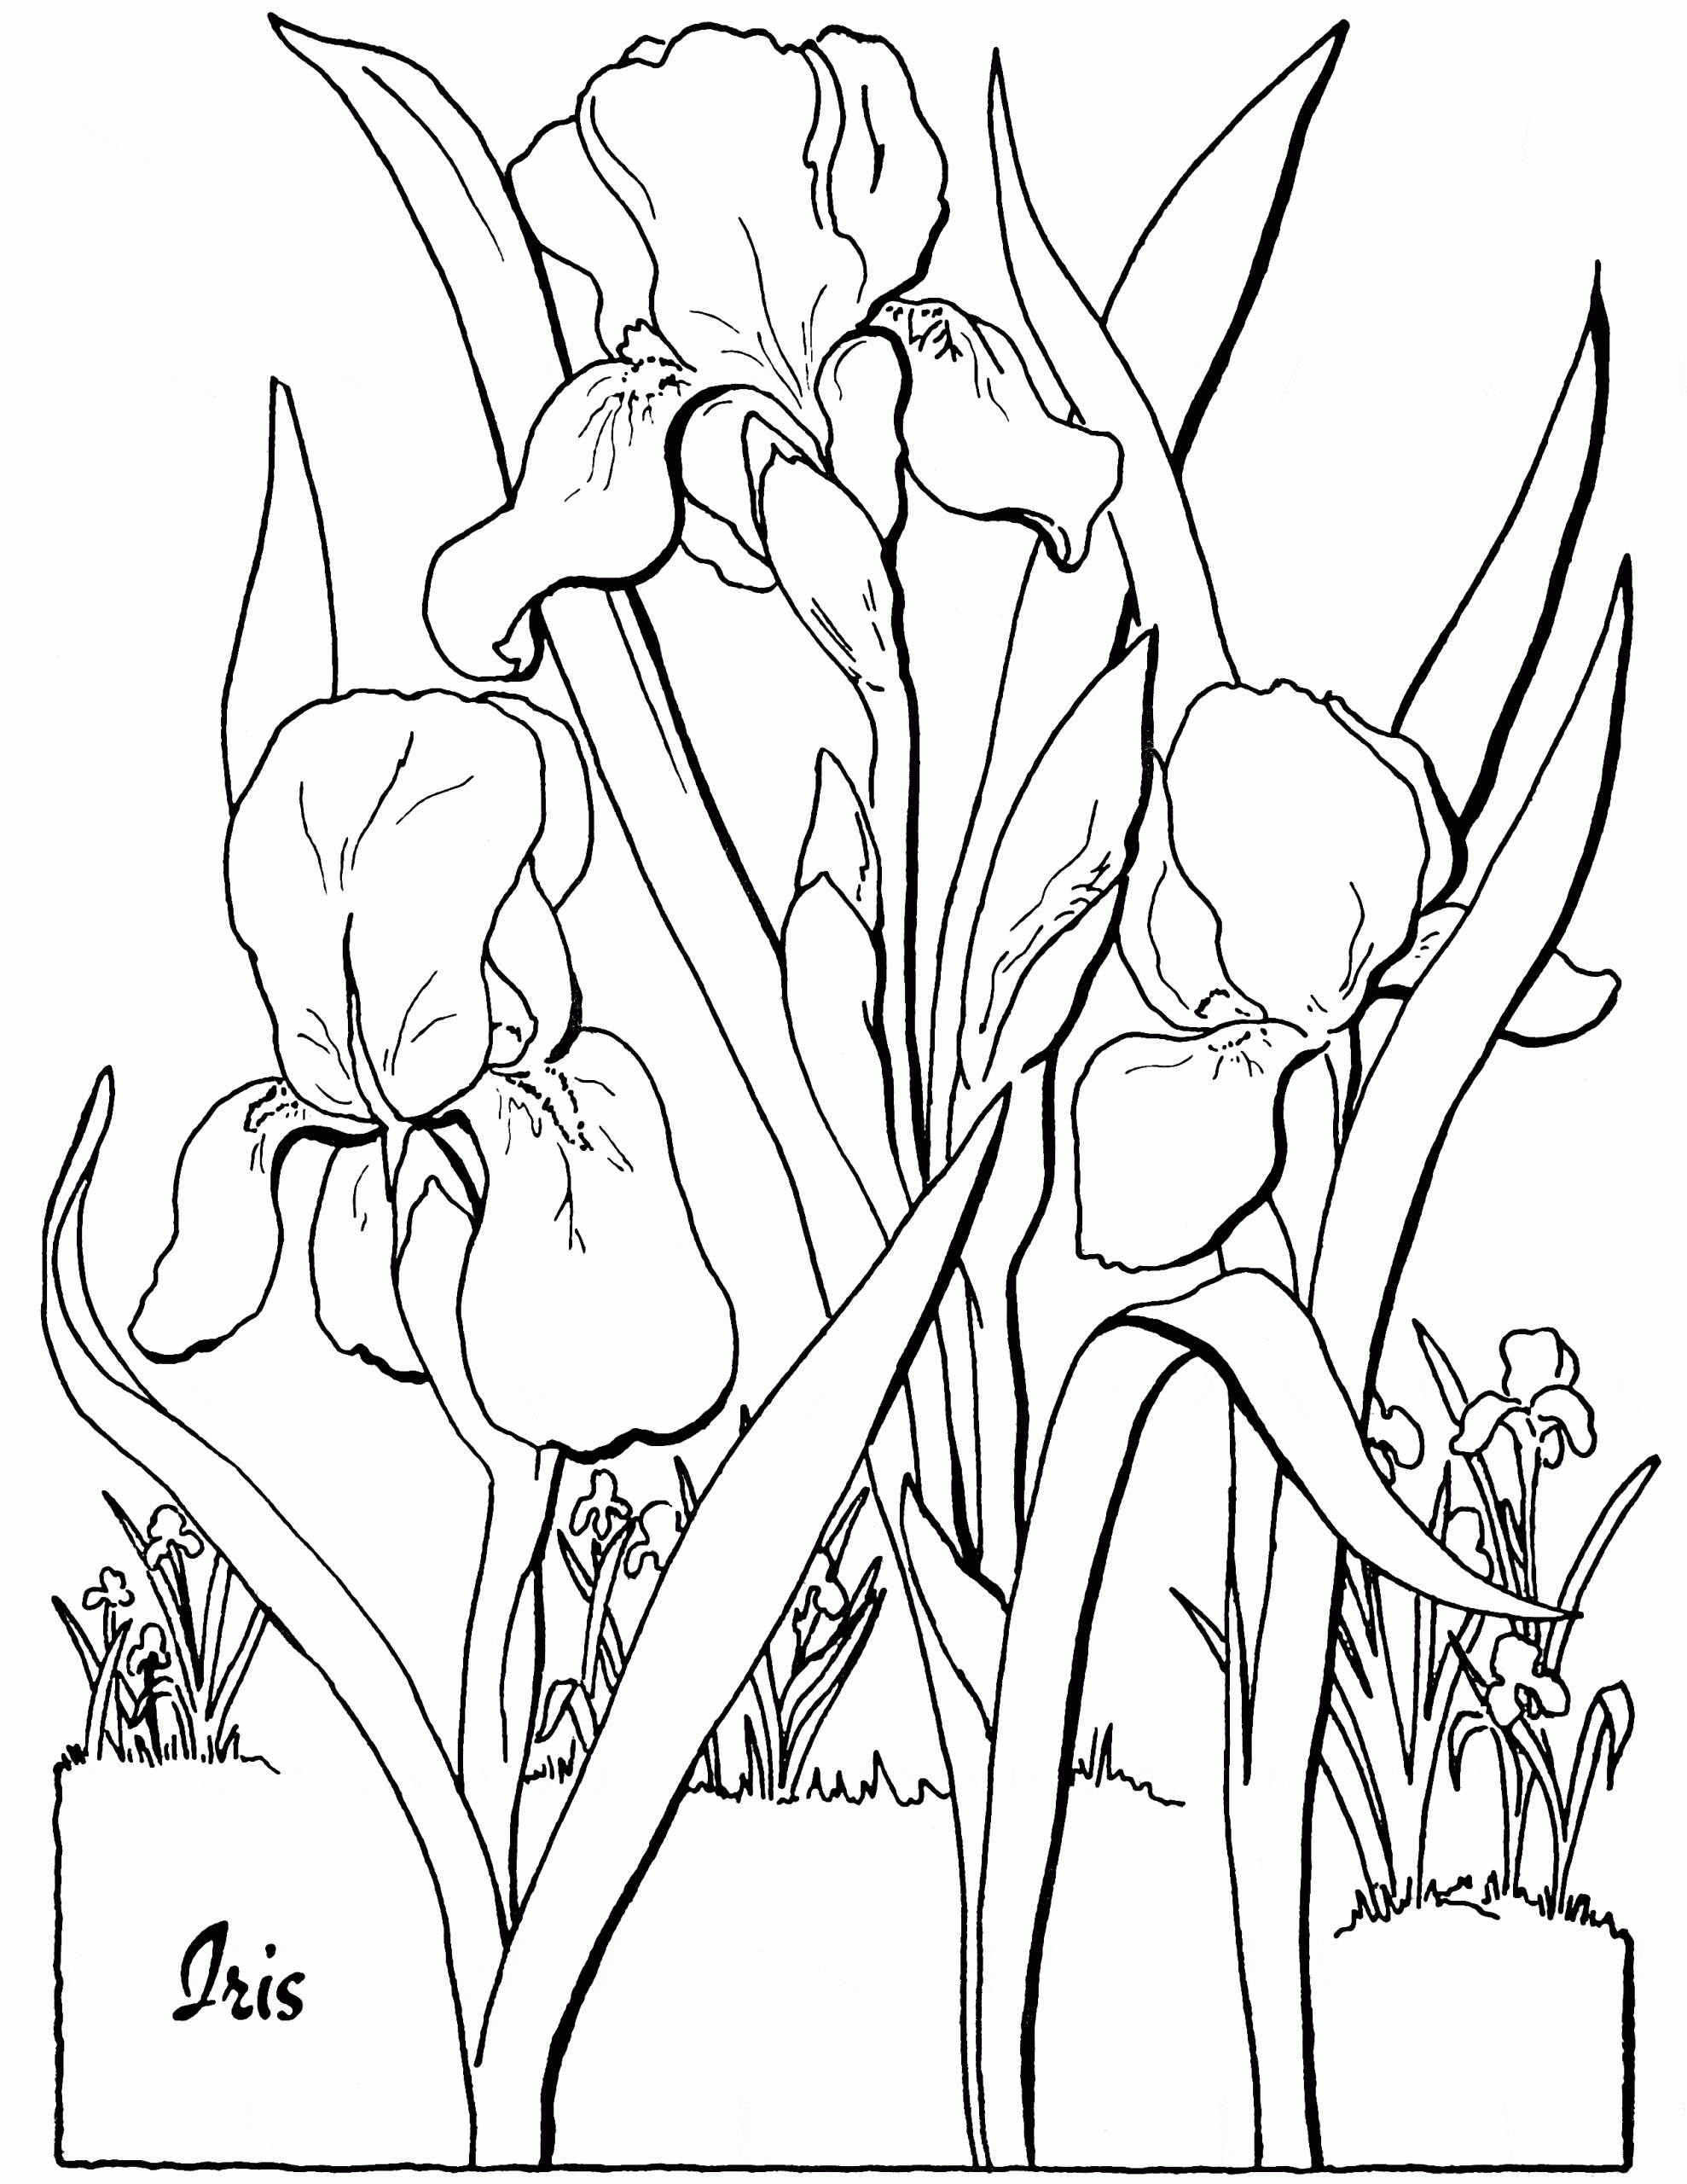 Flower Iris Image For Kids Coloring Page